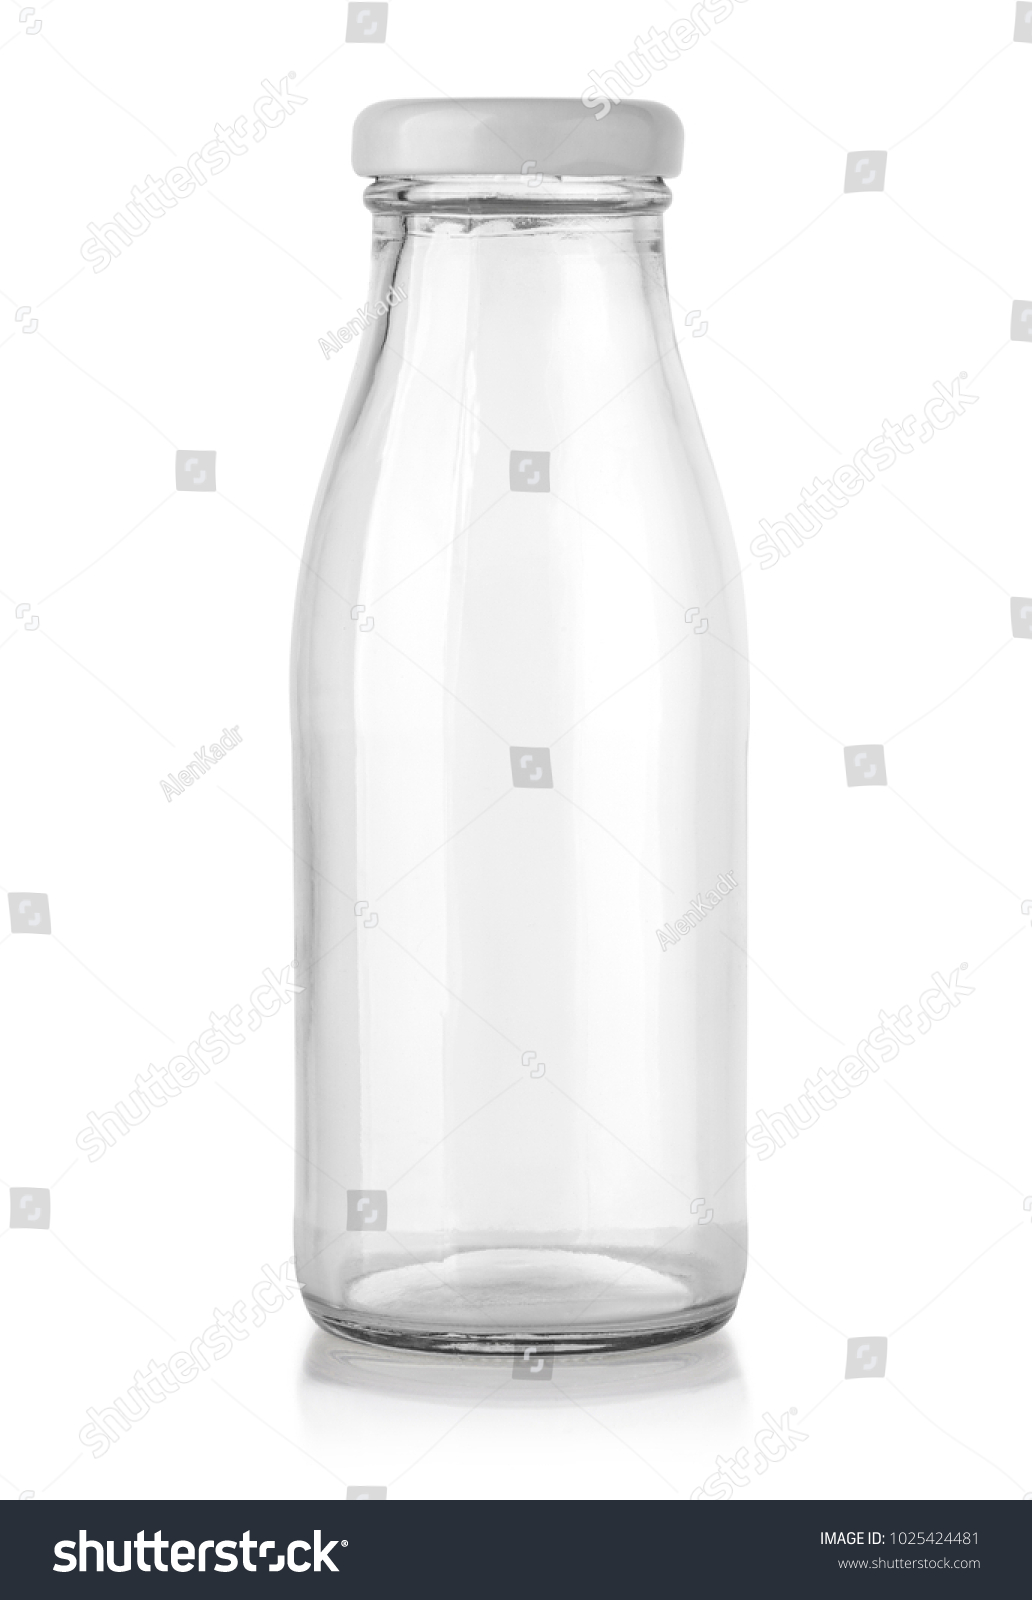 glass bottle isolated on white with clipping path #1025424481